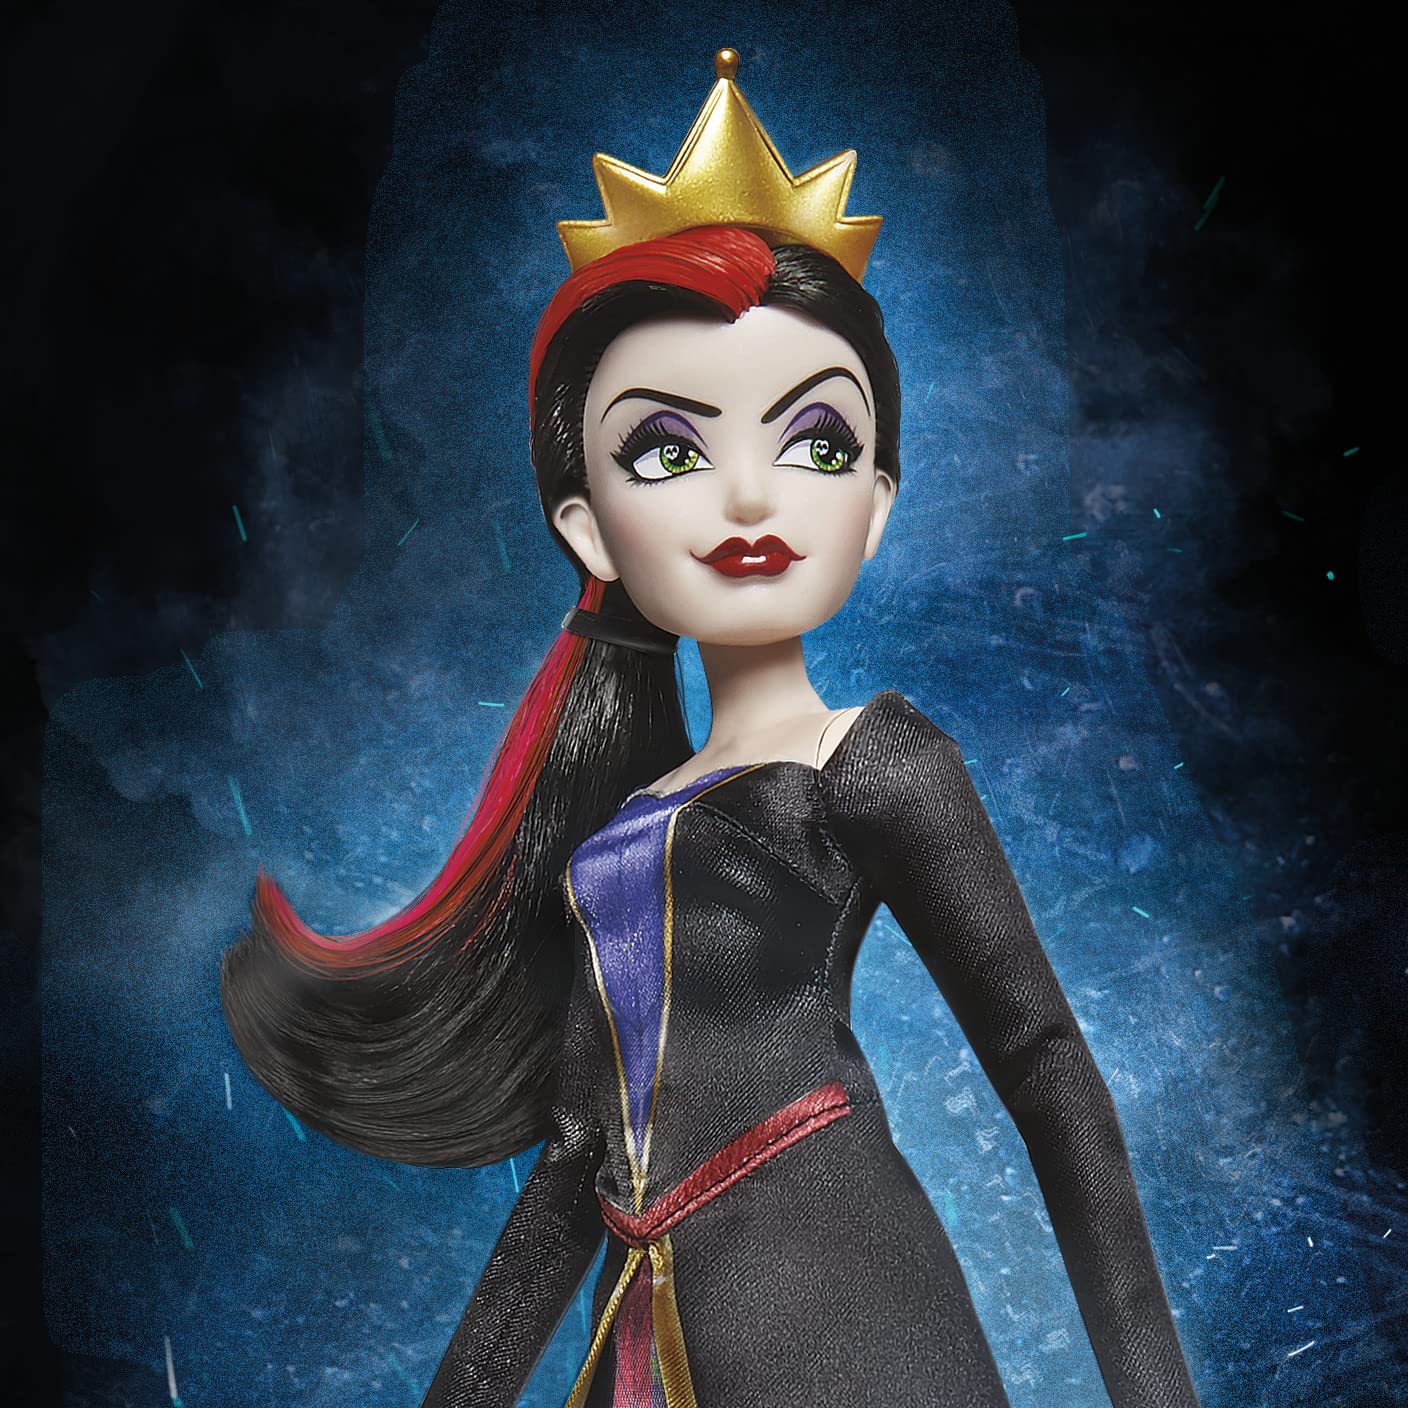 Disney Villains Evil Queen Fashion Doll, Accessories and Removable Clothes, Disney Villains Toy for Kids 5 Years Old and Up